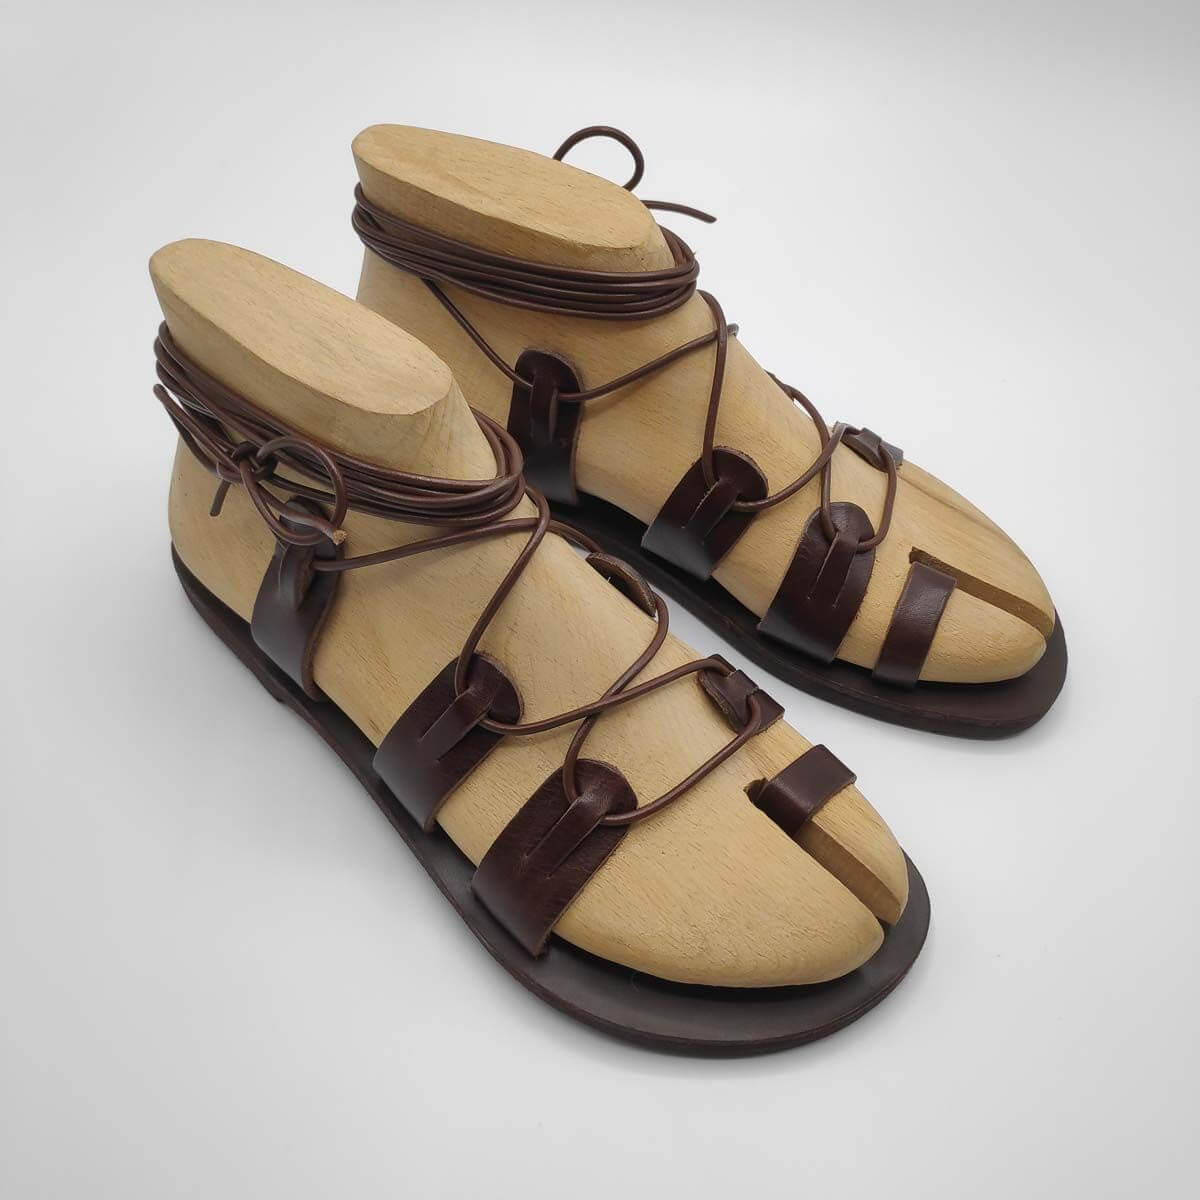 SPARTIAT Lace Up Sandals - Pagonis Greek Sandals